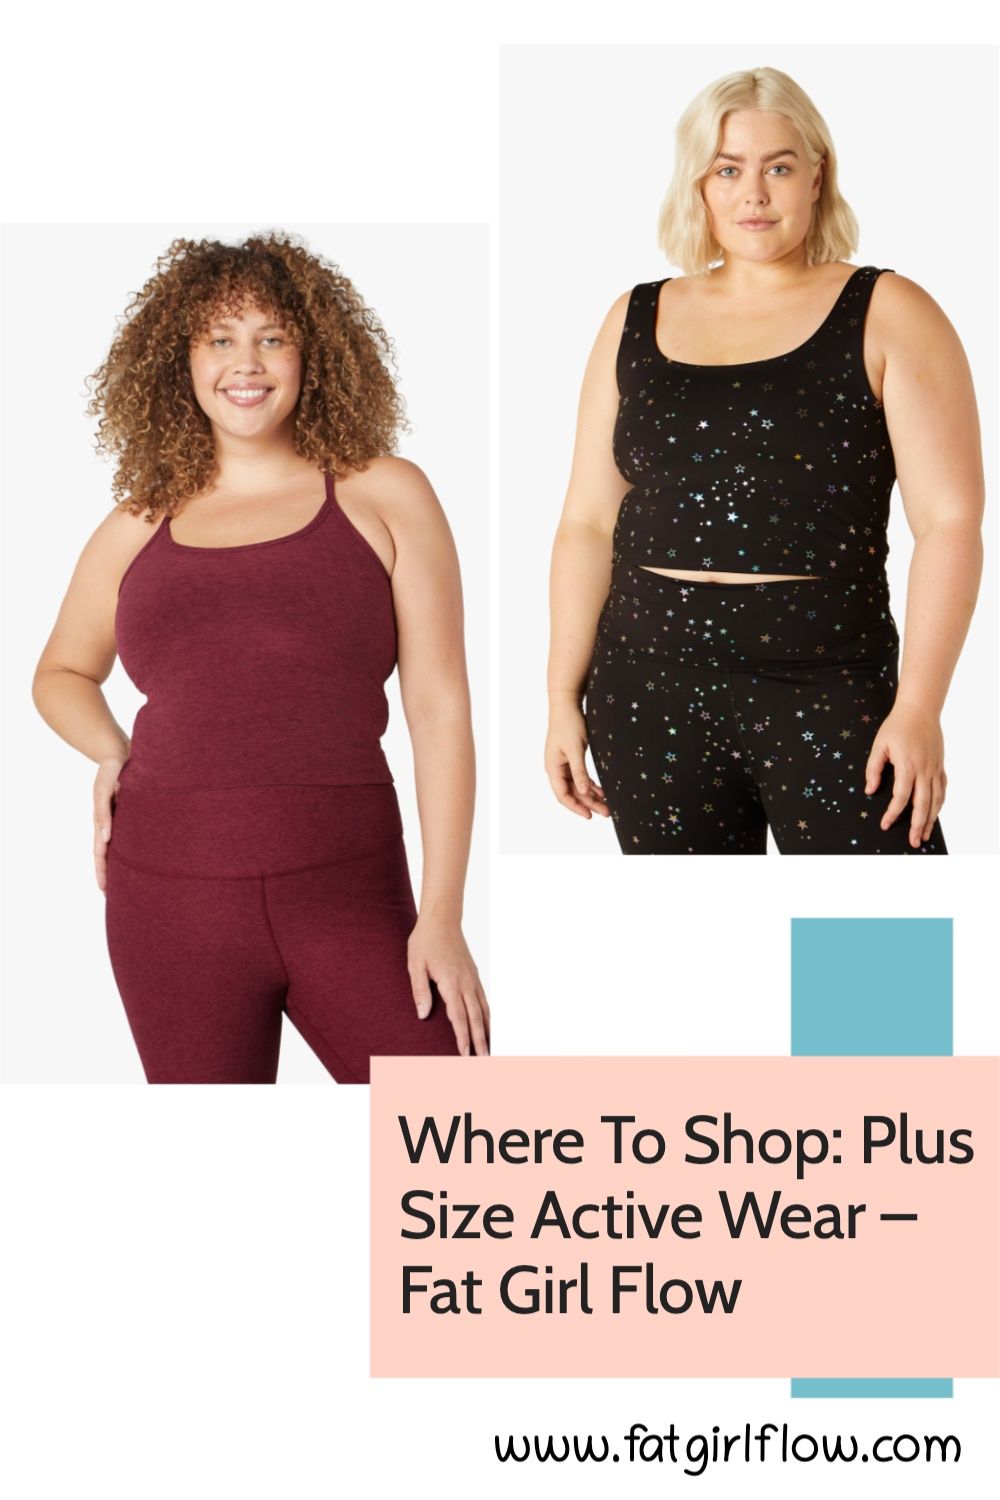 Where To Shop: Plus Size Active Wear – Fat Girl Flow